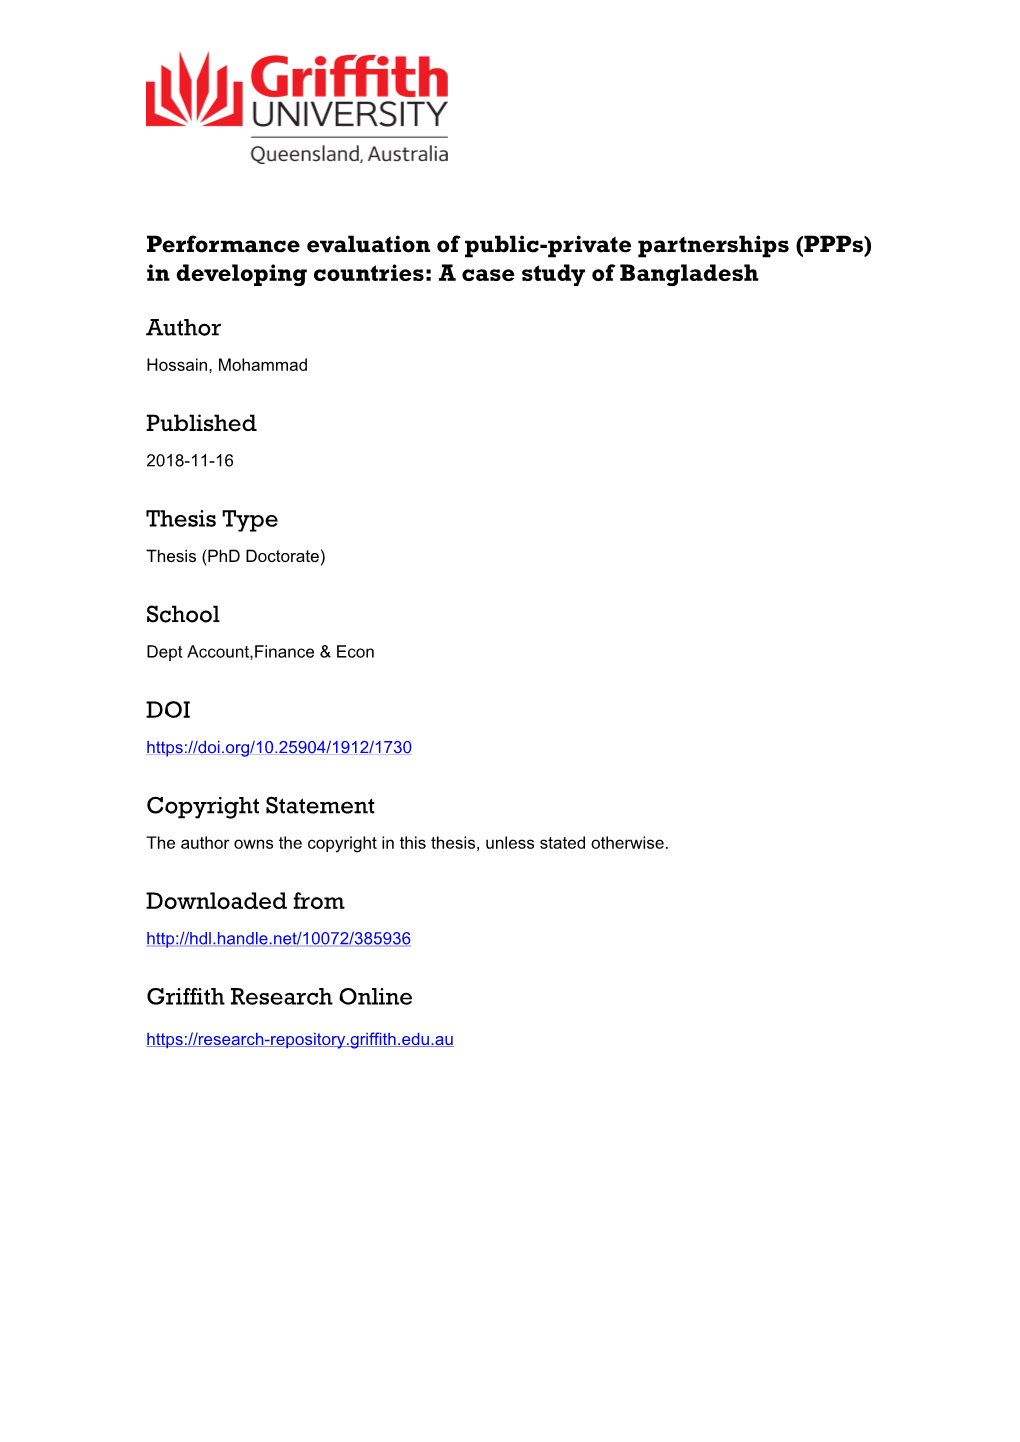 (Ppps) in Developing Countries: a Case Study of Bangladesh